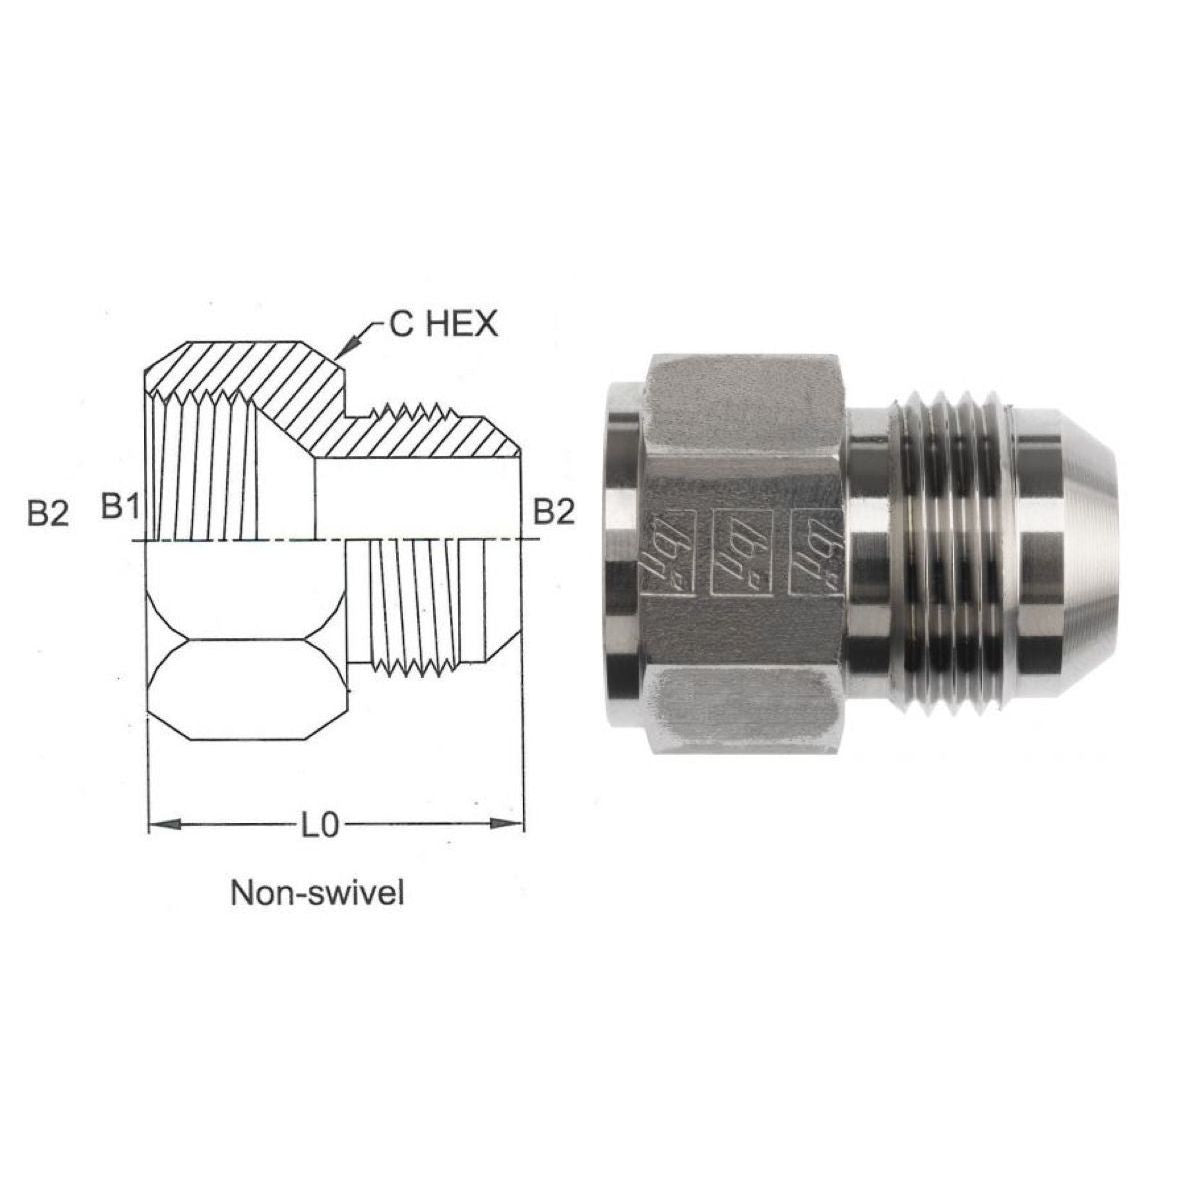 2406-06-05-SS : OneHydraulics  Straight Reducer, Straight, 0.375 (3/8") Female JIC x 0.3125 (5/16") Male, Stainless Steel